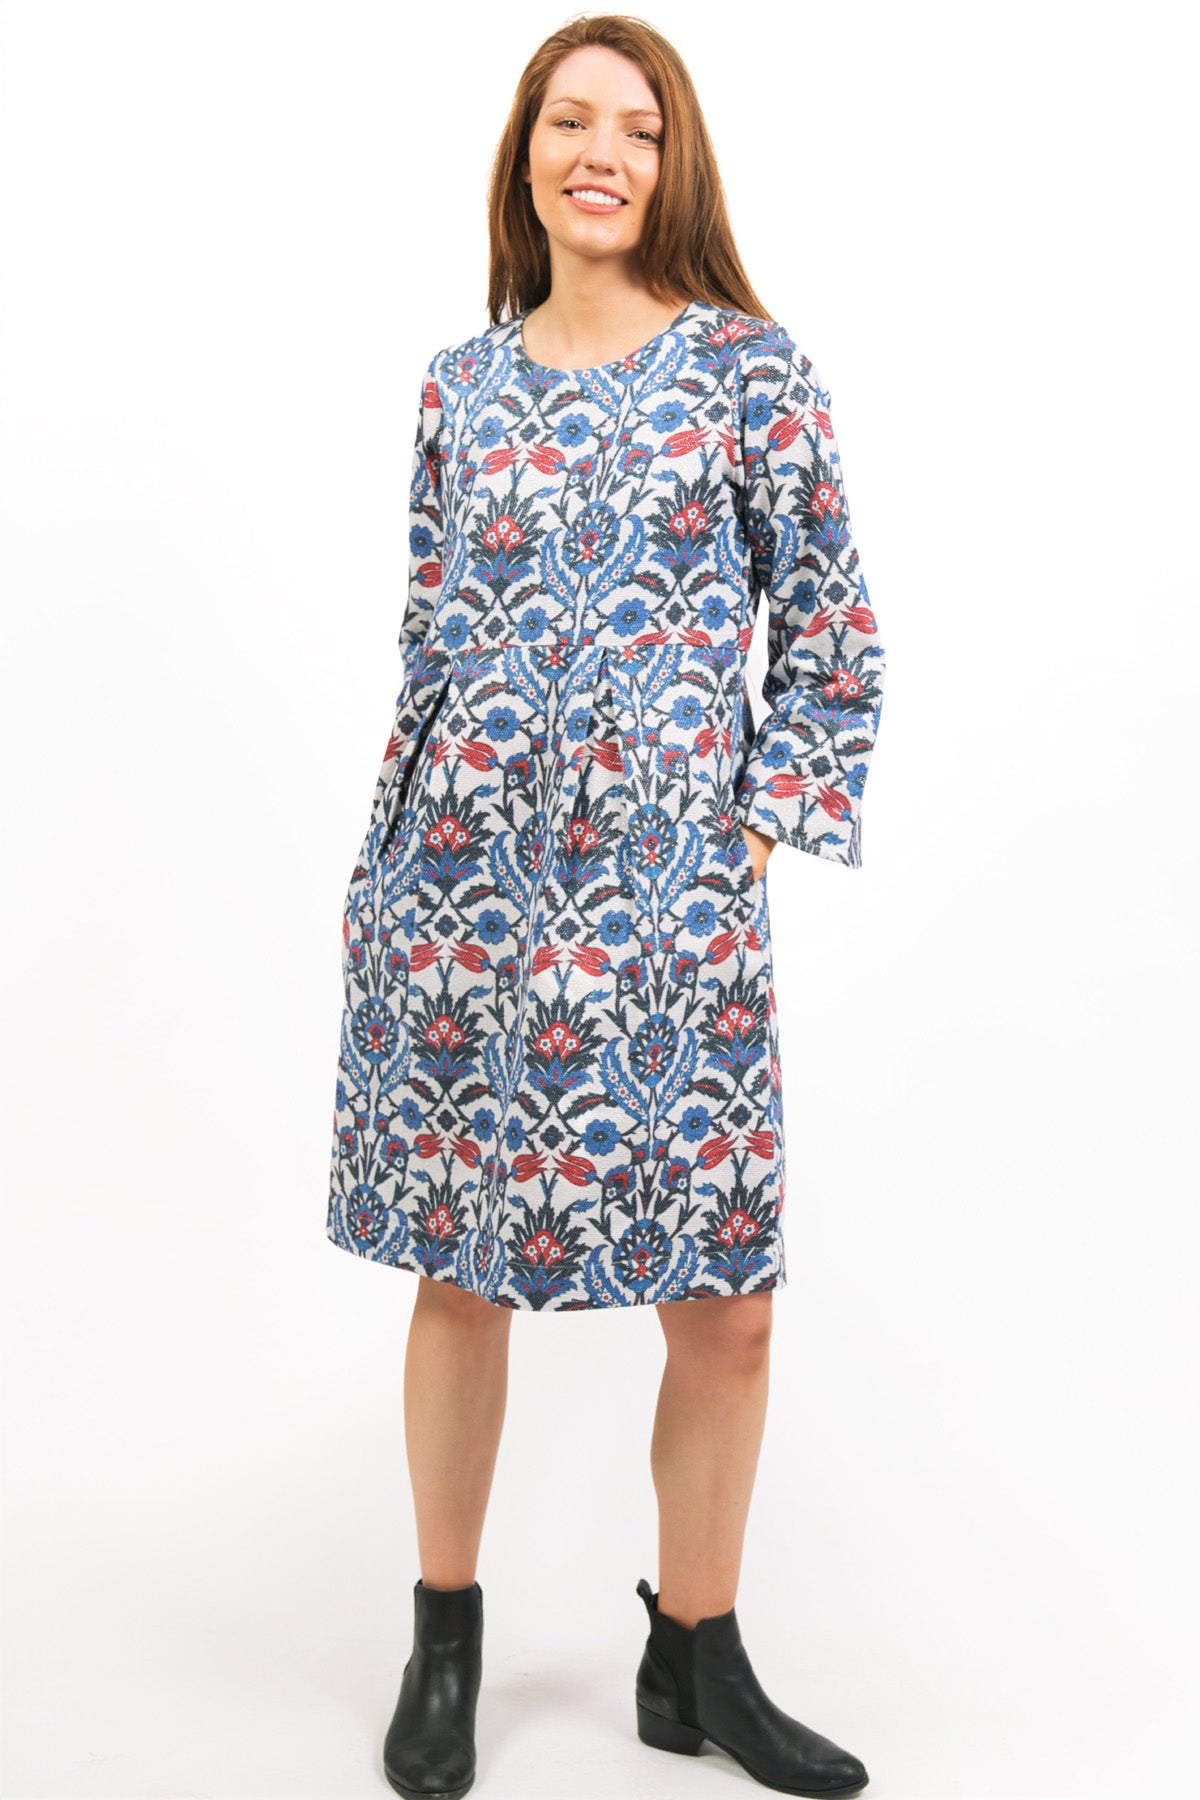 SLIGHTLY MATT VERSION OF LUNA LUREX PRINTED FLORAL DRESS - zohaonline- FRONT VIEW ON THE MODEL